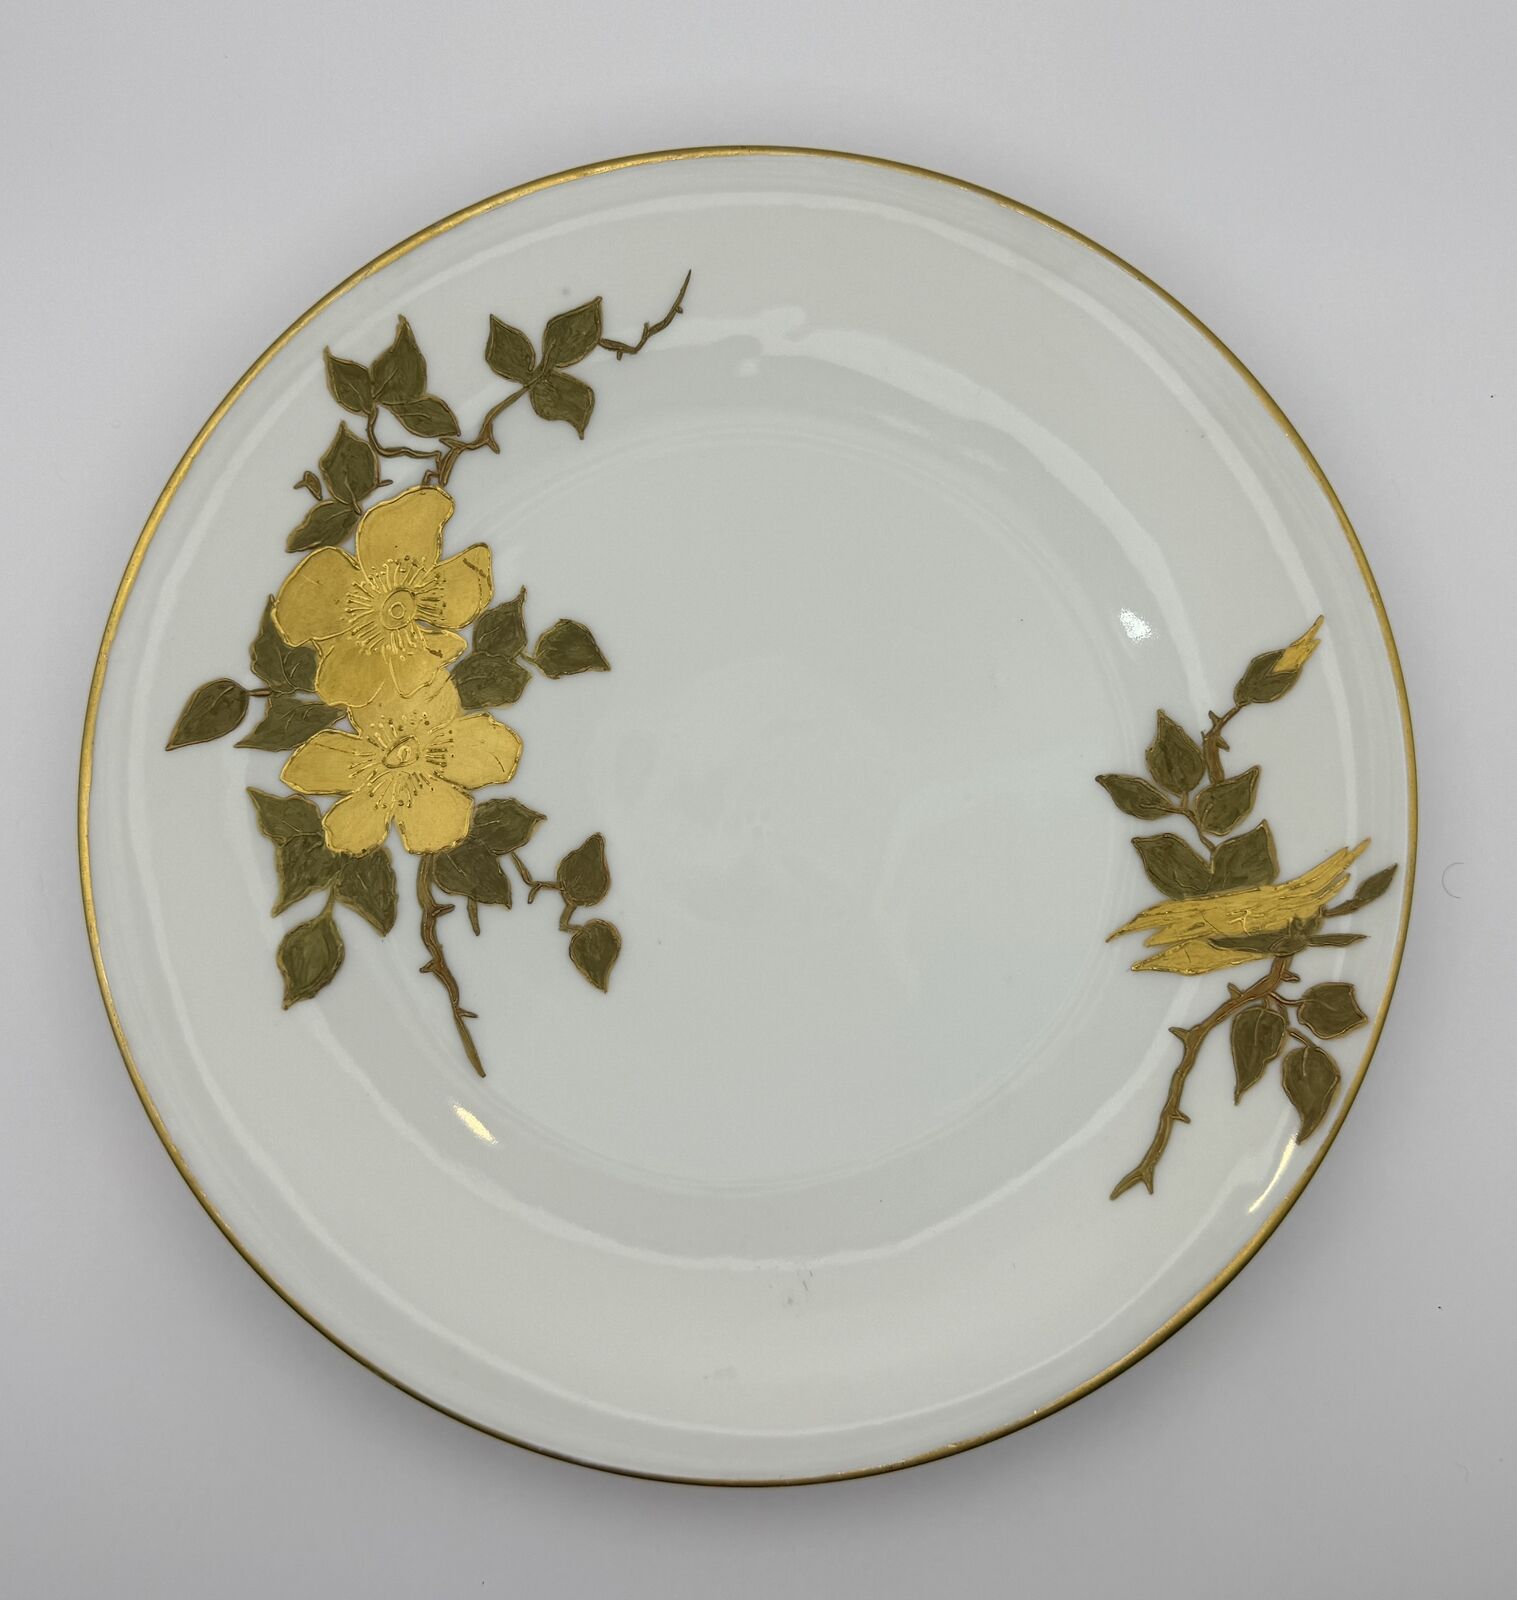 T&V Limoges Hand-Painted Plate with Gold Floral Design